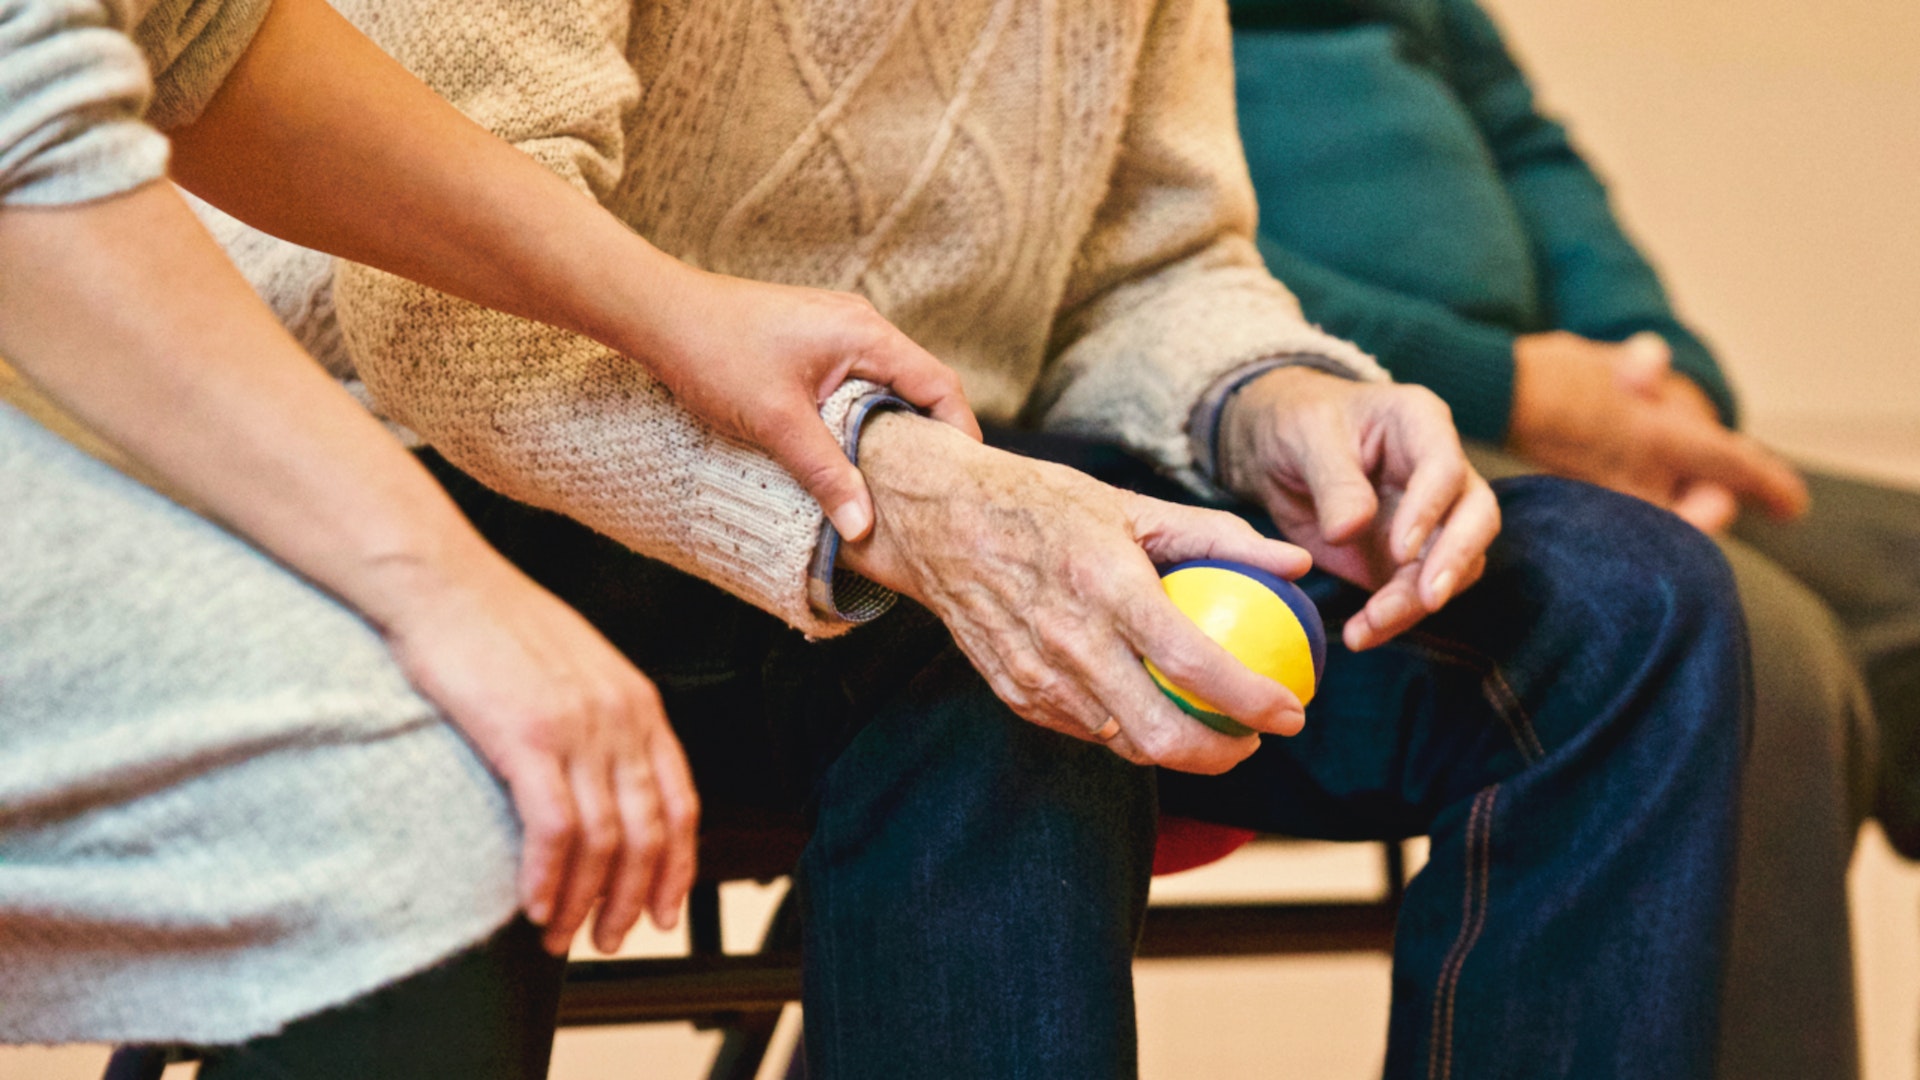 A caregiver holding a senior's hand, who is gripping a stress reliever ball.